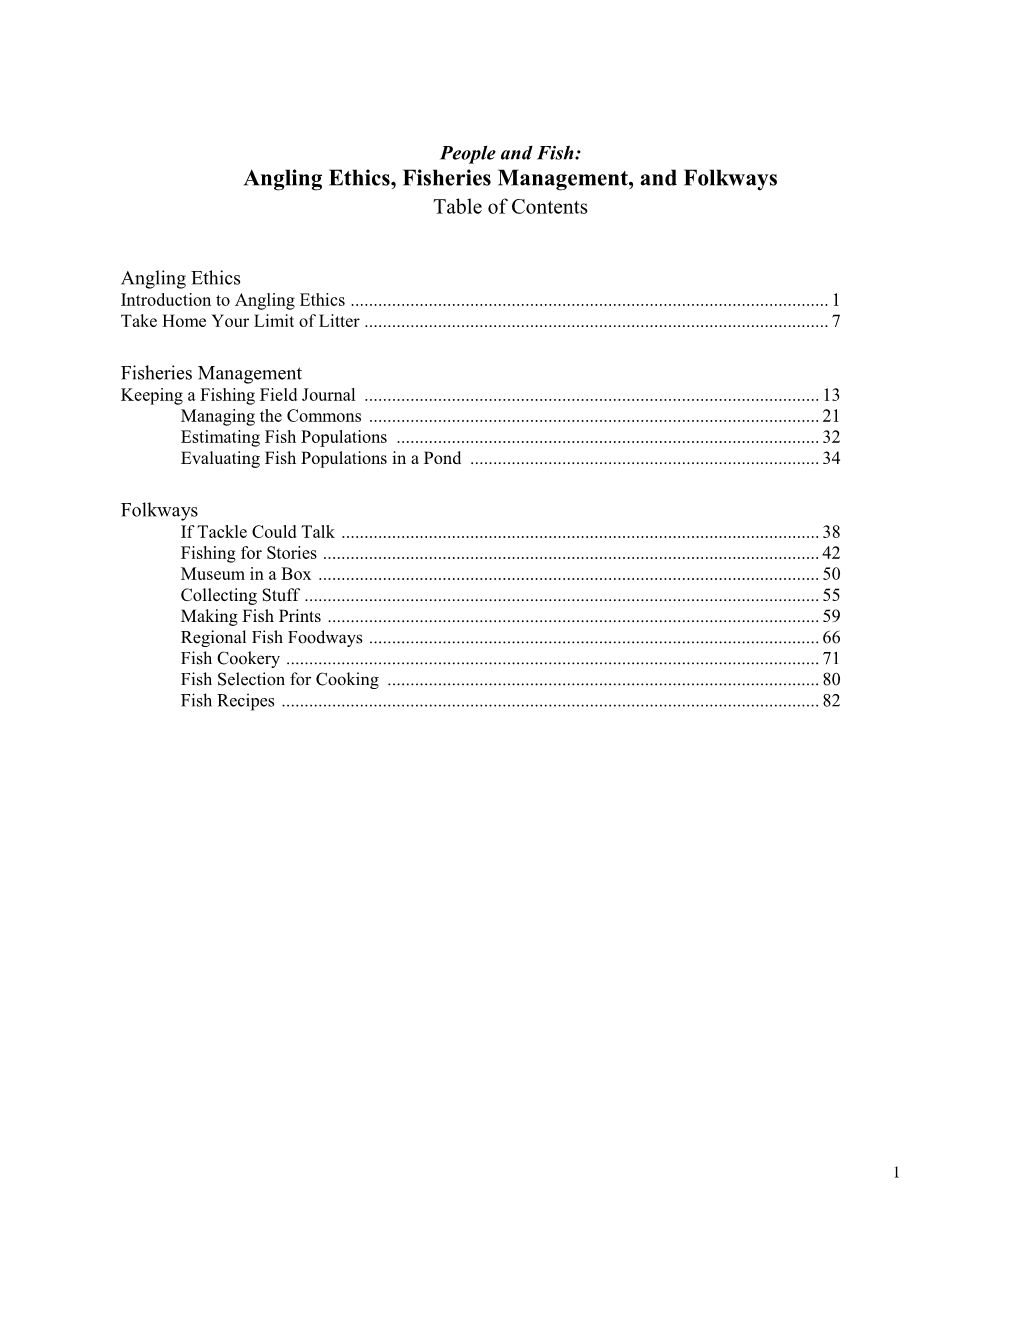 Angling Ethics, Fisheries Management, and Folkways Table of Contents